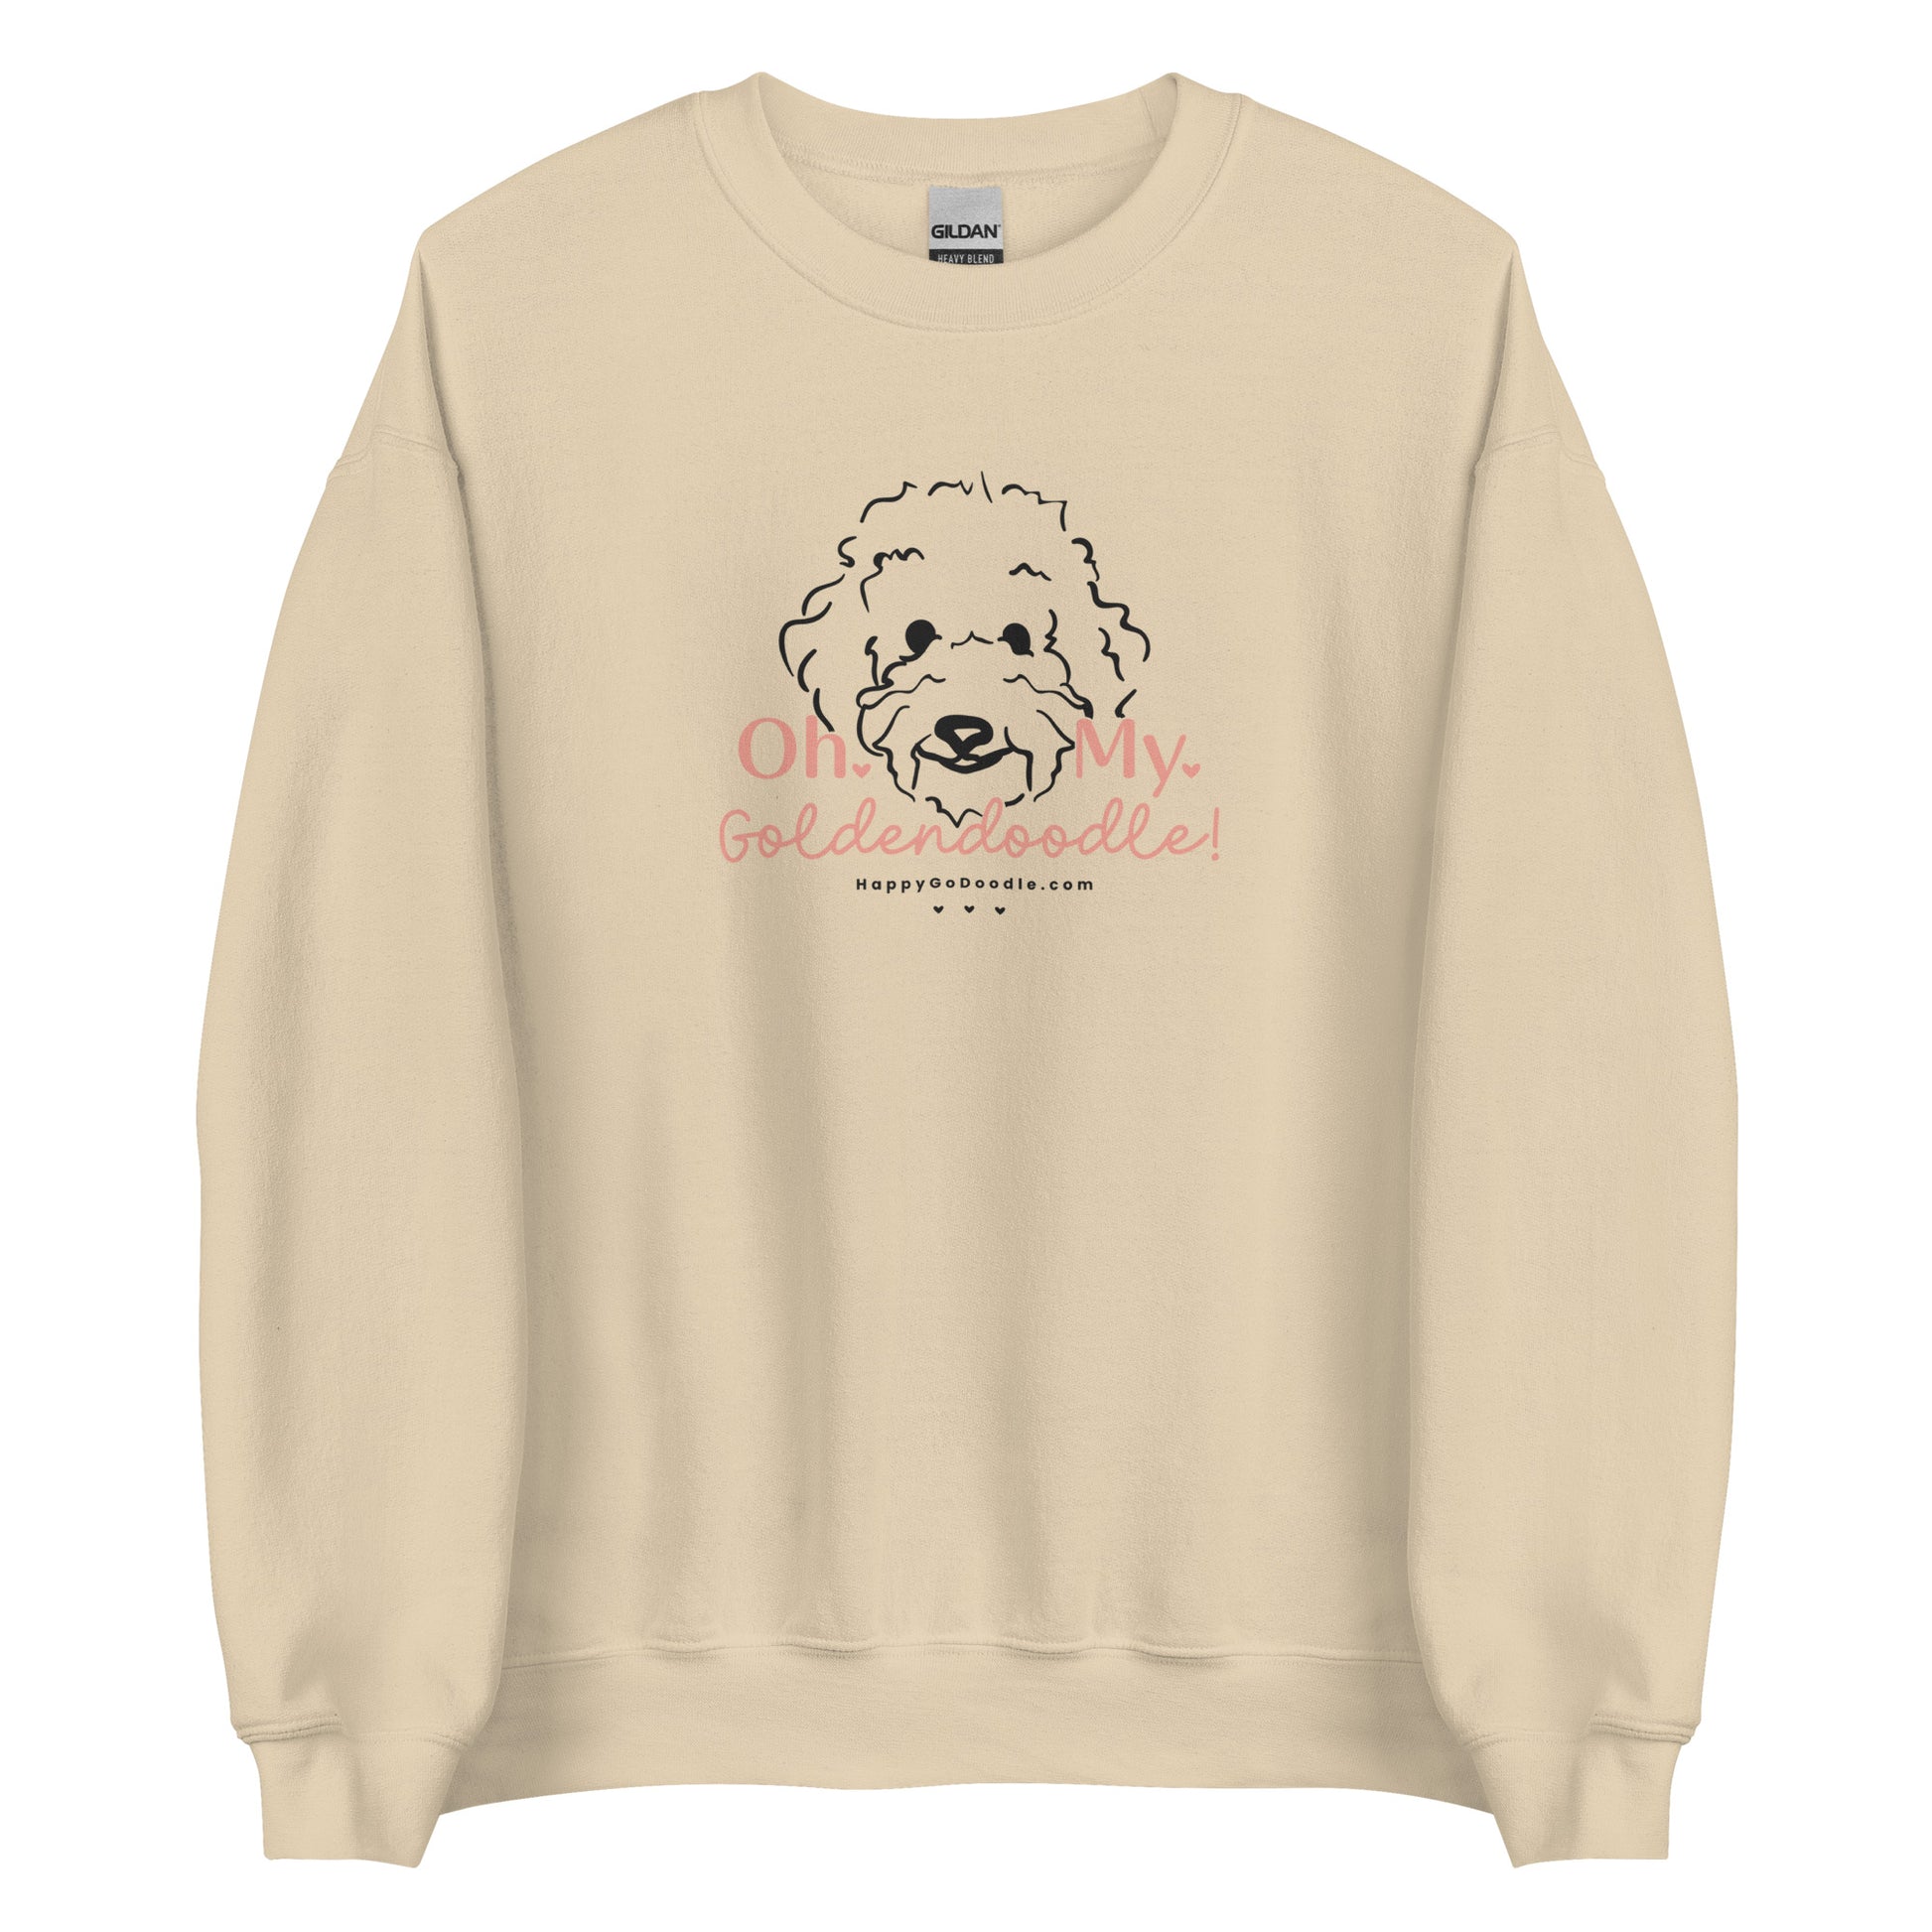 Goldendoodle crew neck sweatshirt with Goldendoodle face and words "Oh My Goldendoodle" in  sand